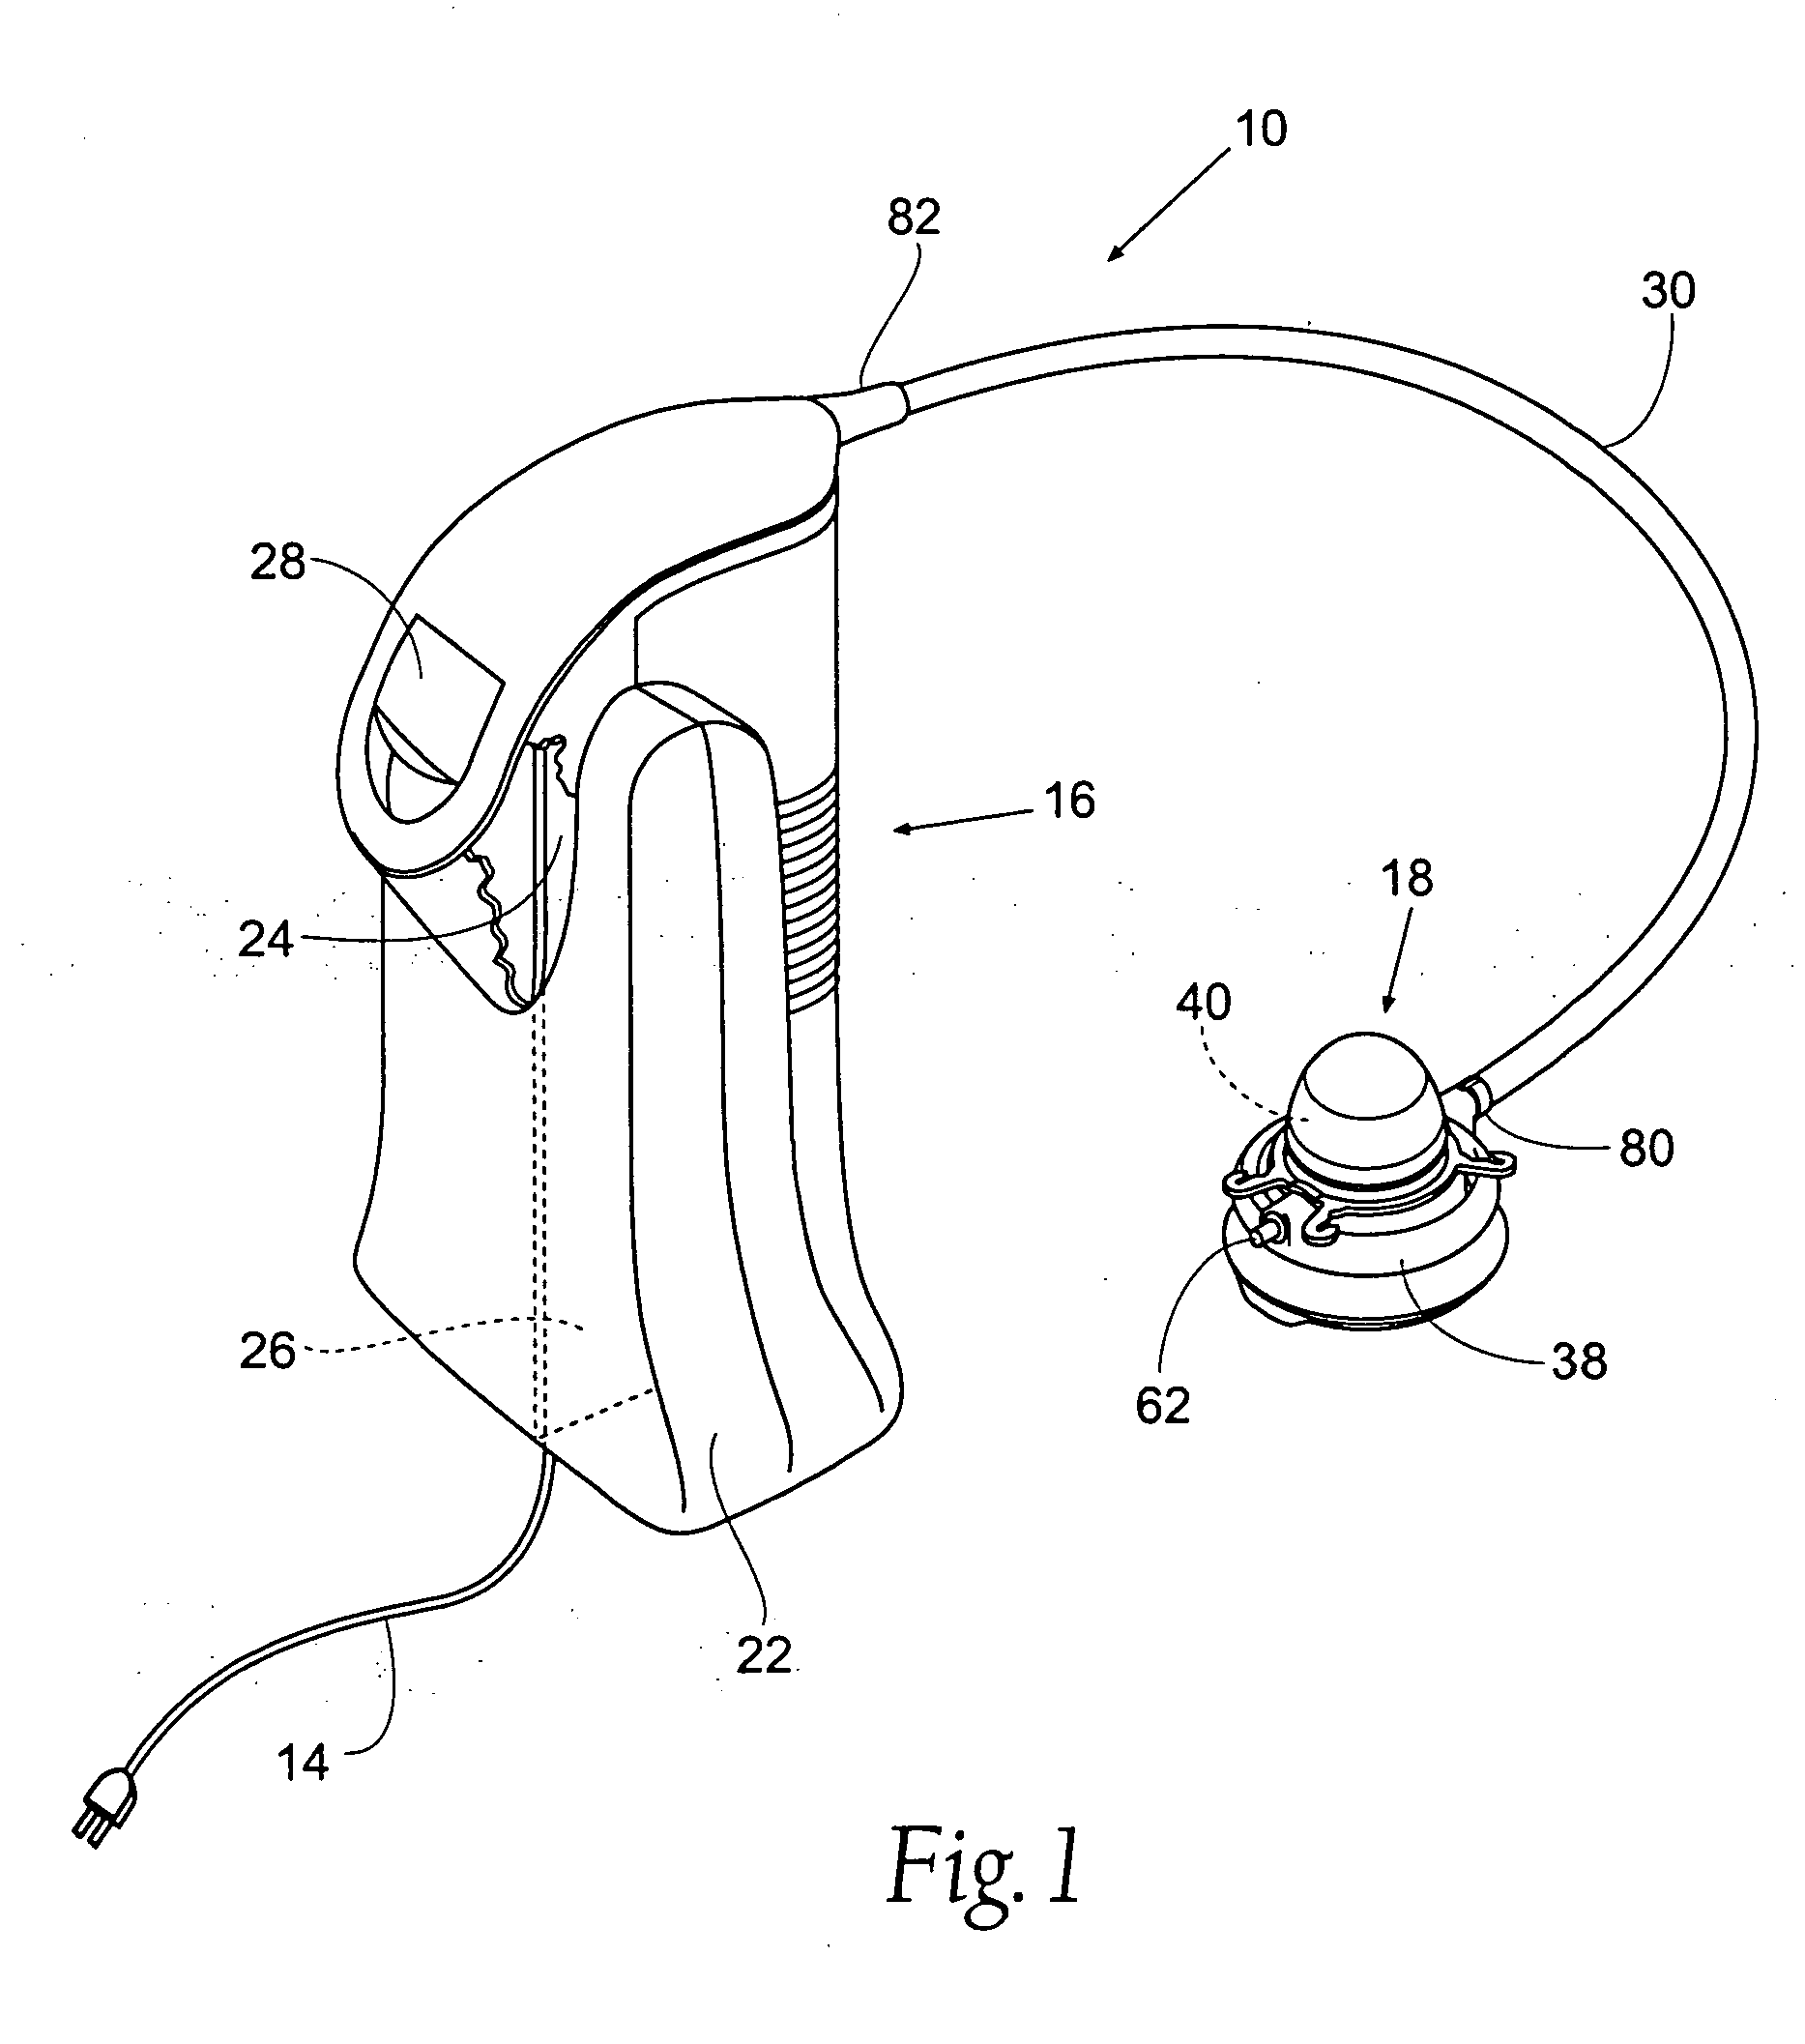 Applicators that house and support ultrasound transducers for transcutaneou delivery of ultrasound energy